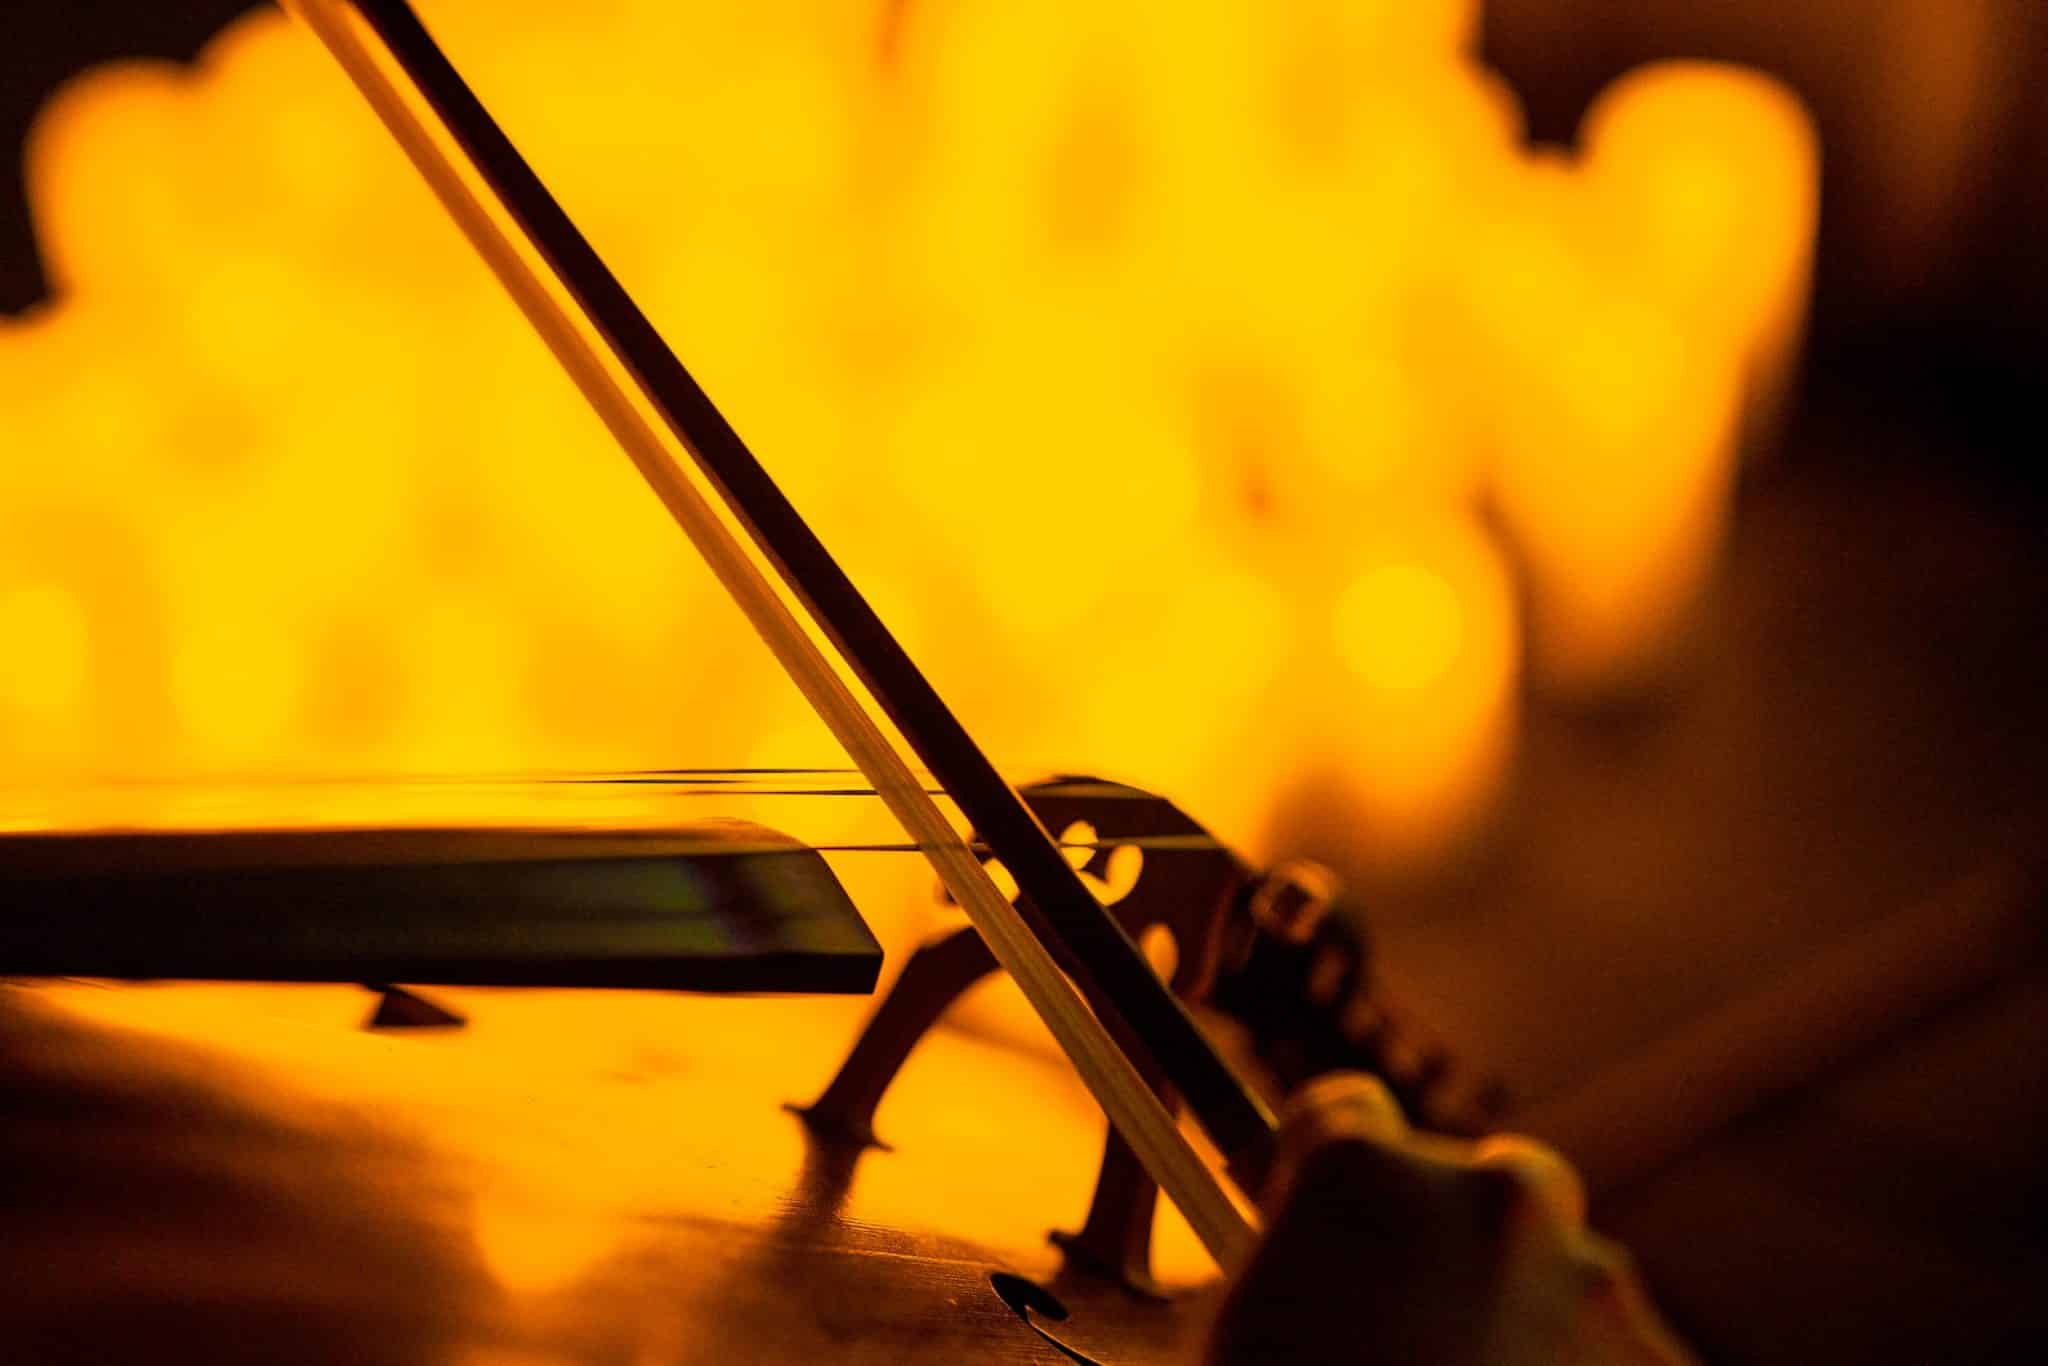 A close-up of a bow being used to play a string instrument with the blurry image of candles in the background.